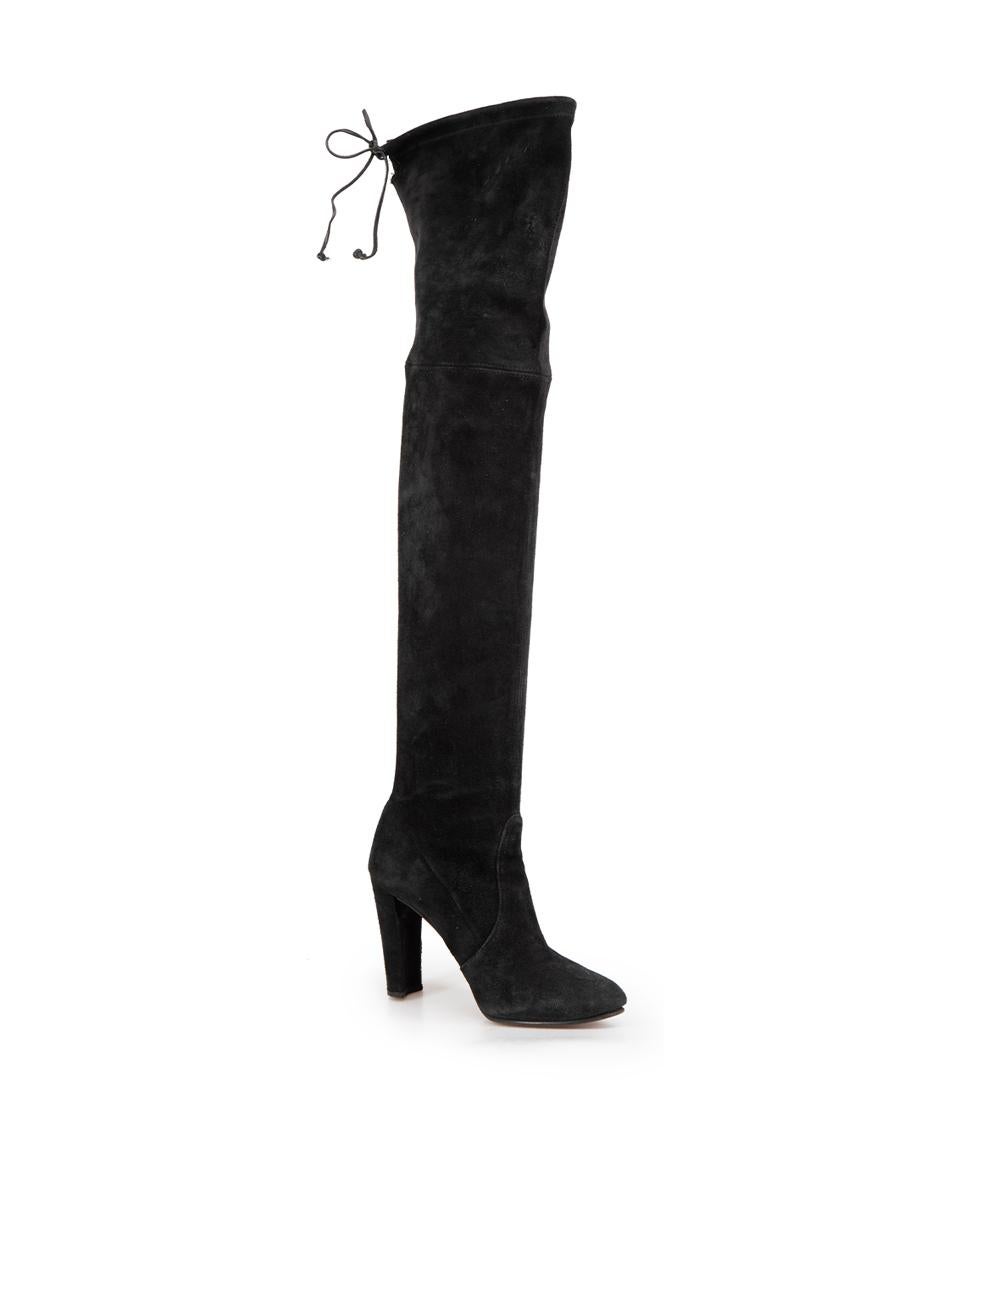 CONDITION is Good. Minor wear to boots is evident. Light wear to both sides and heels of both boots with abrasions to the suede on this used Stuart Weitzman designer resale item.
 
Details
Black
Suede
Over the knee high boots
Almond toe
Hig